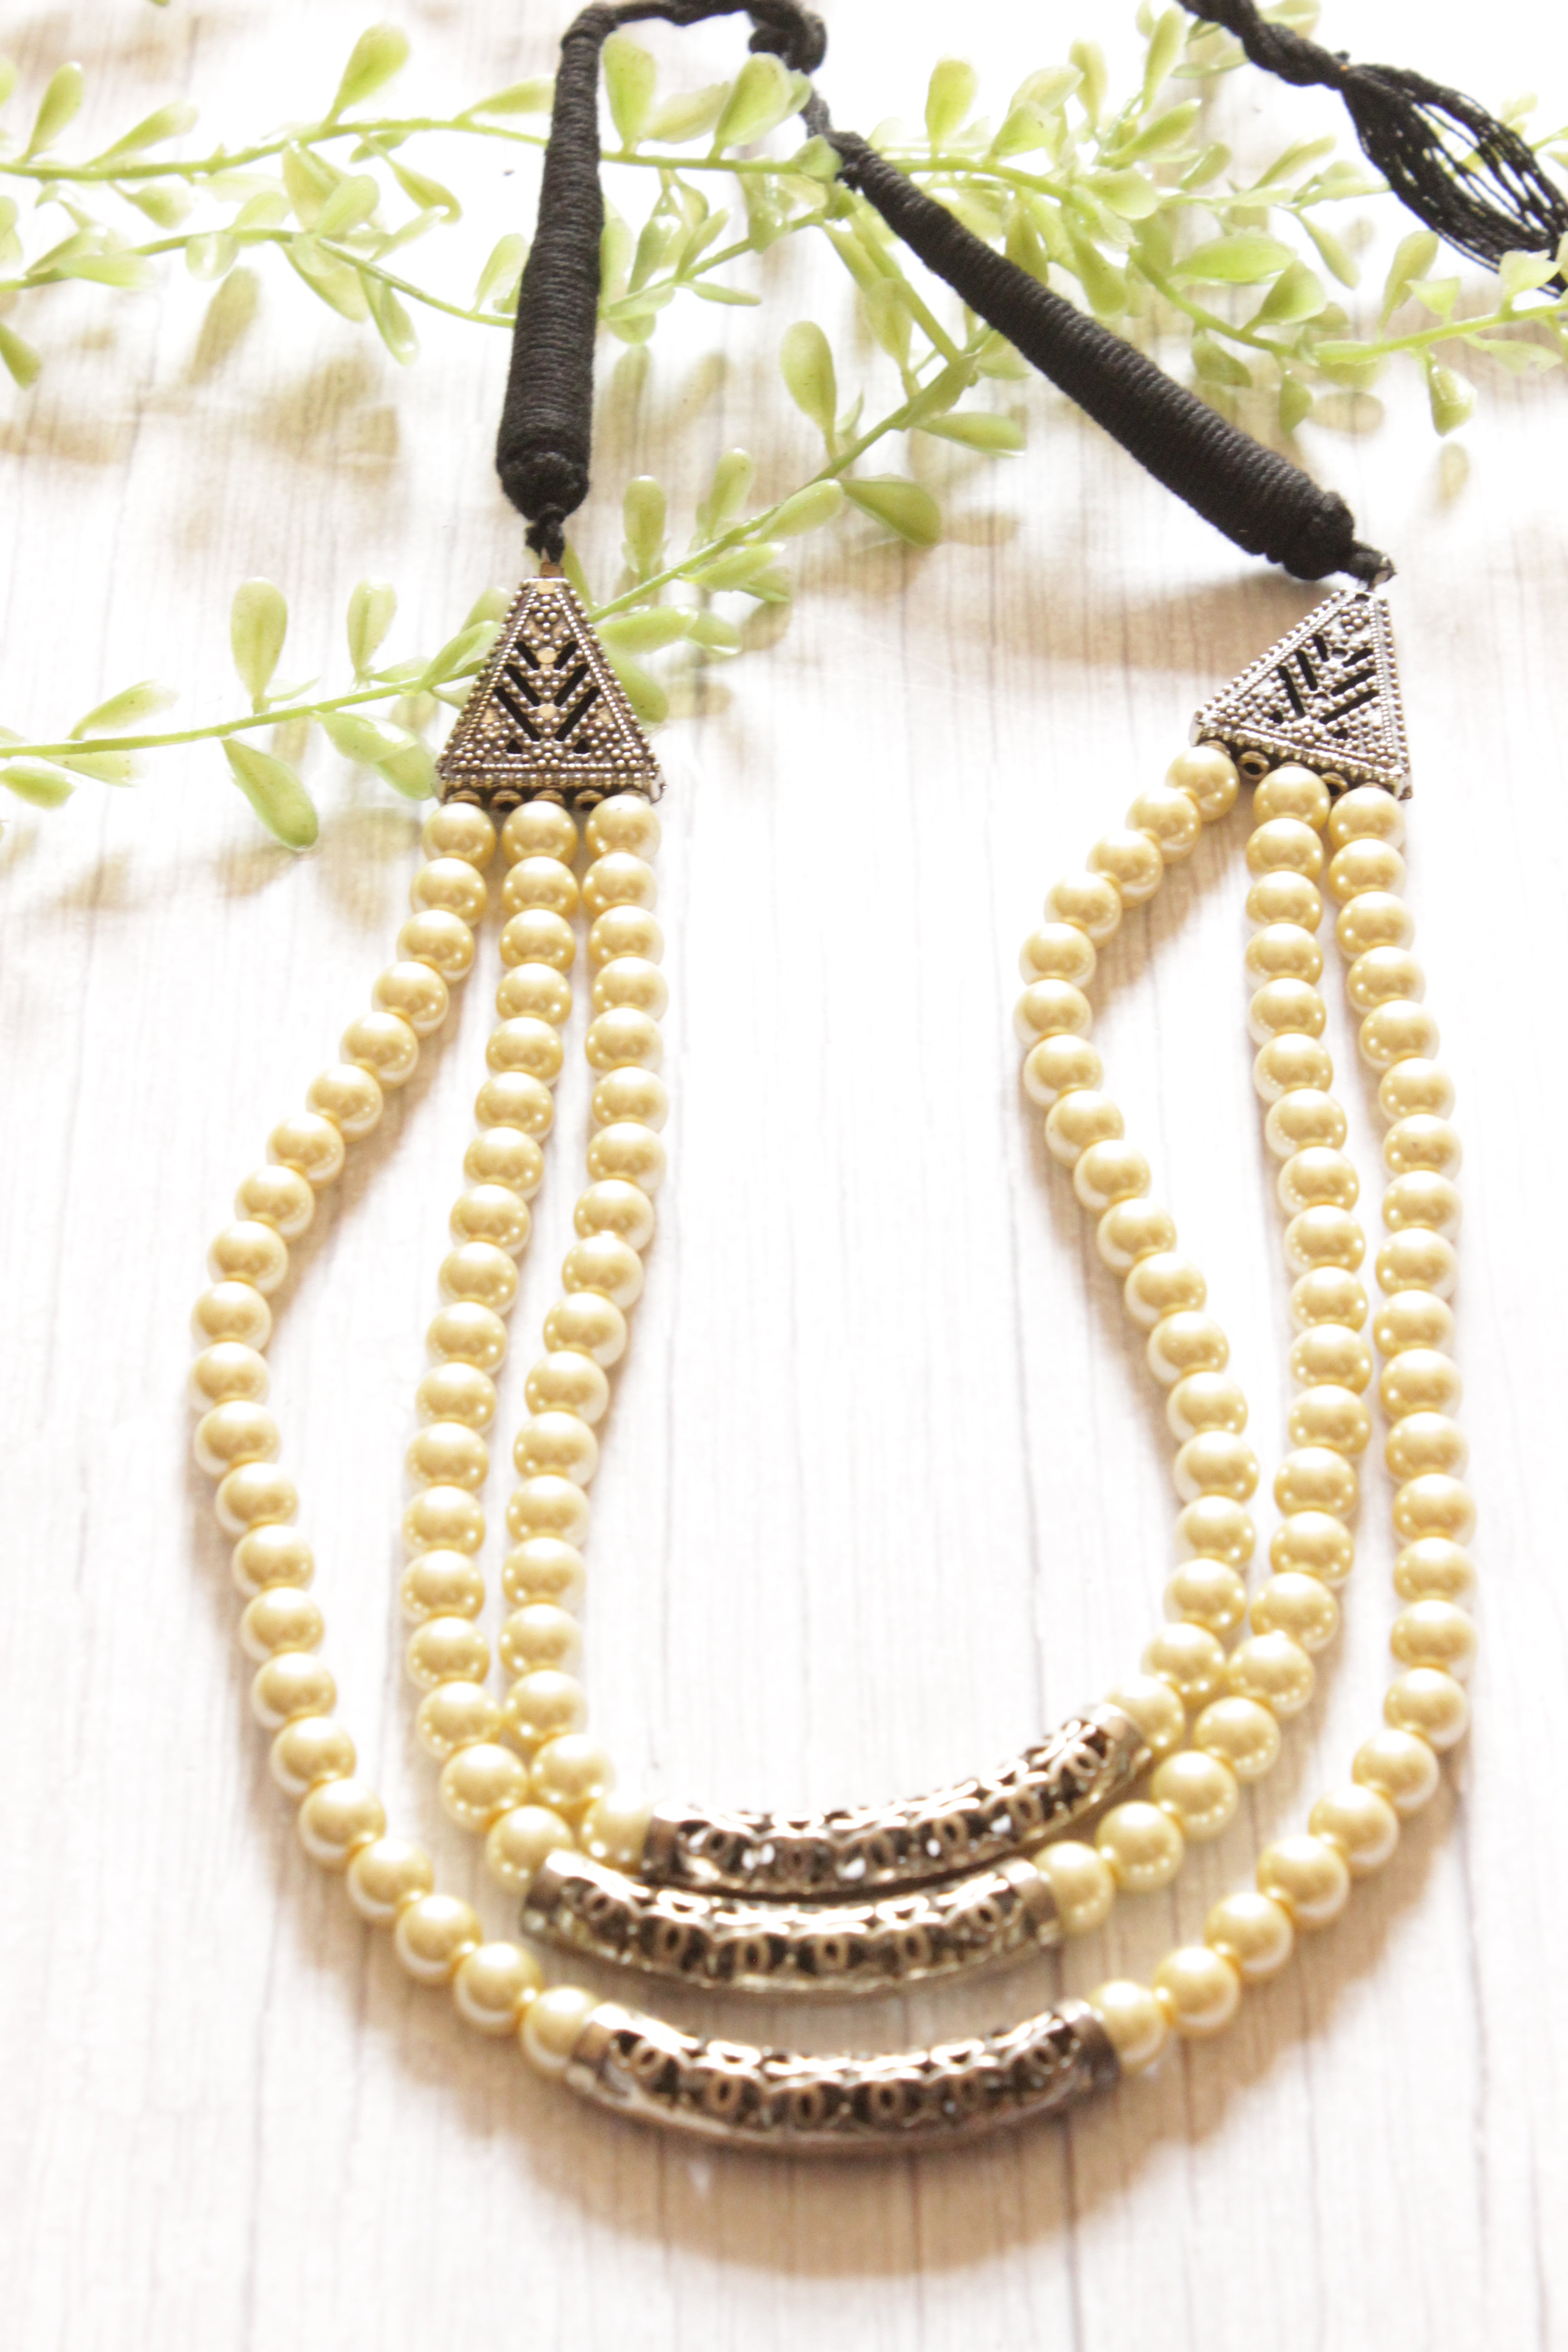 Ivory Beads Hasli Style 3 Layer Necklace with Adjustable Rope Closure